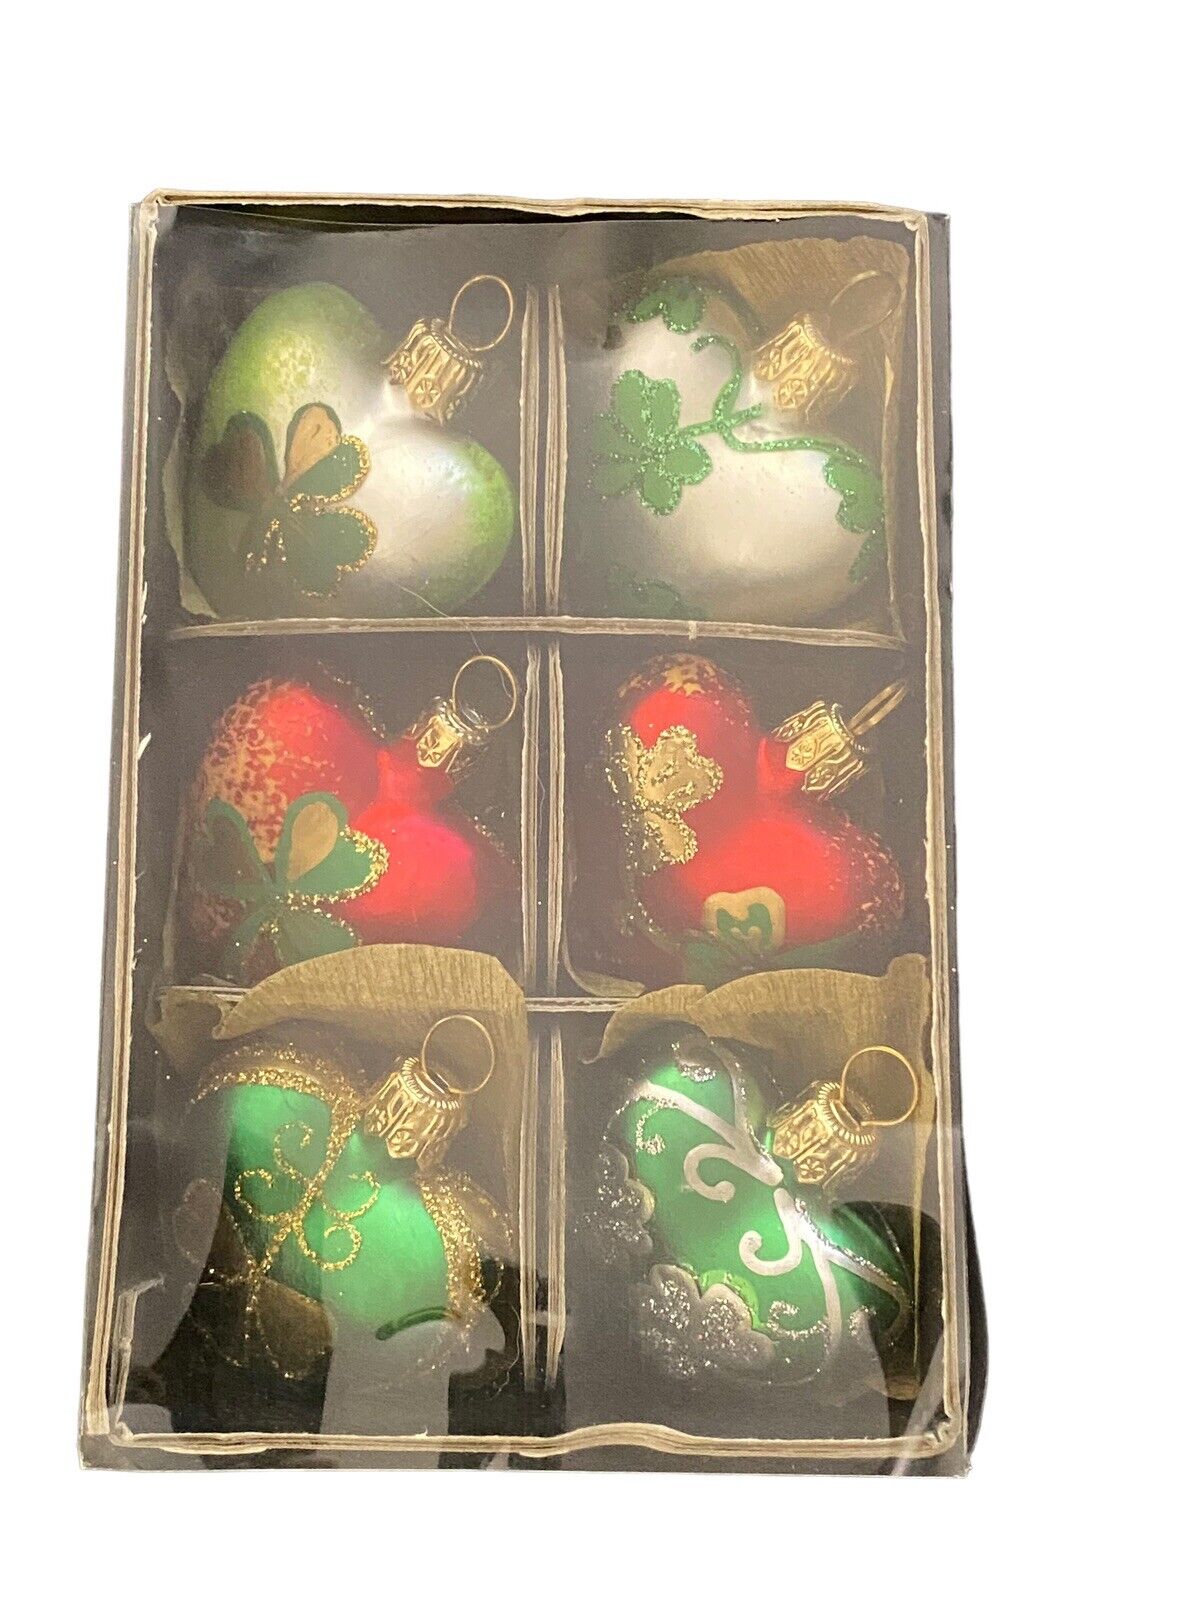 6 Colorful Heart Shaped Shamrock Christmas Ornaments By Blarney Woolen Mills